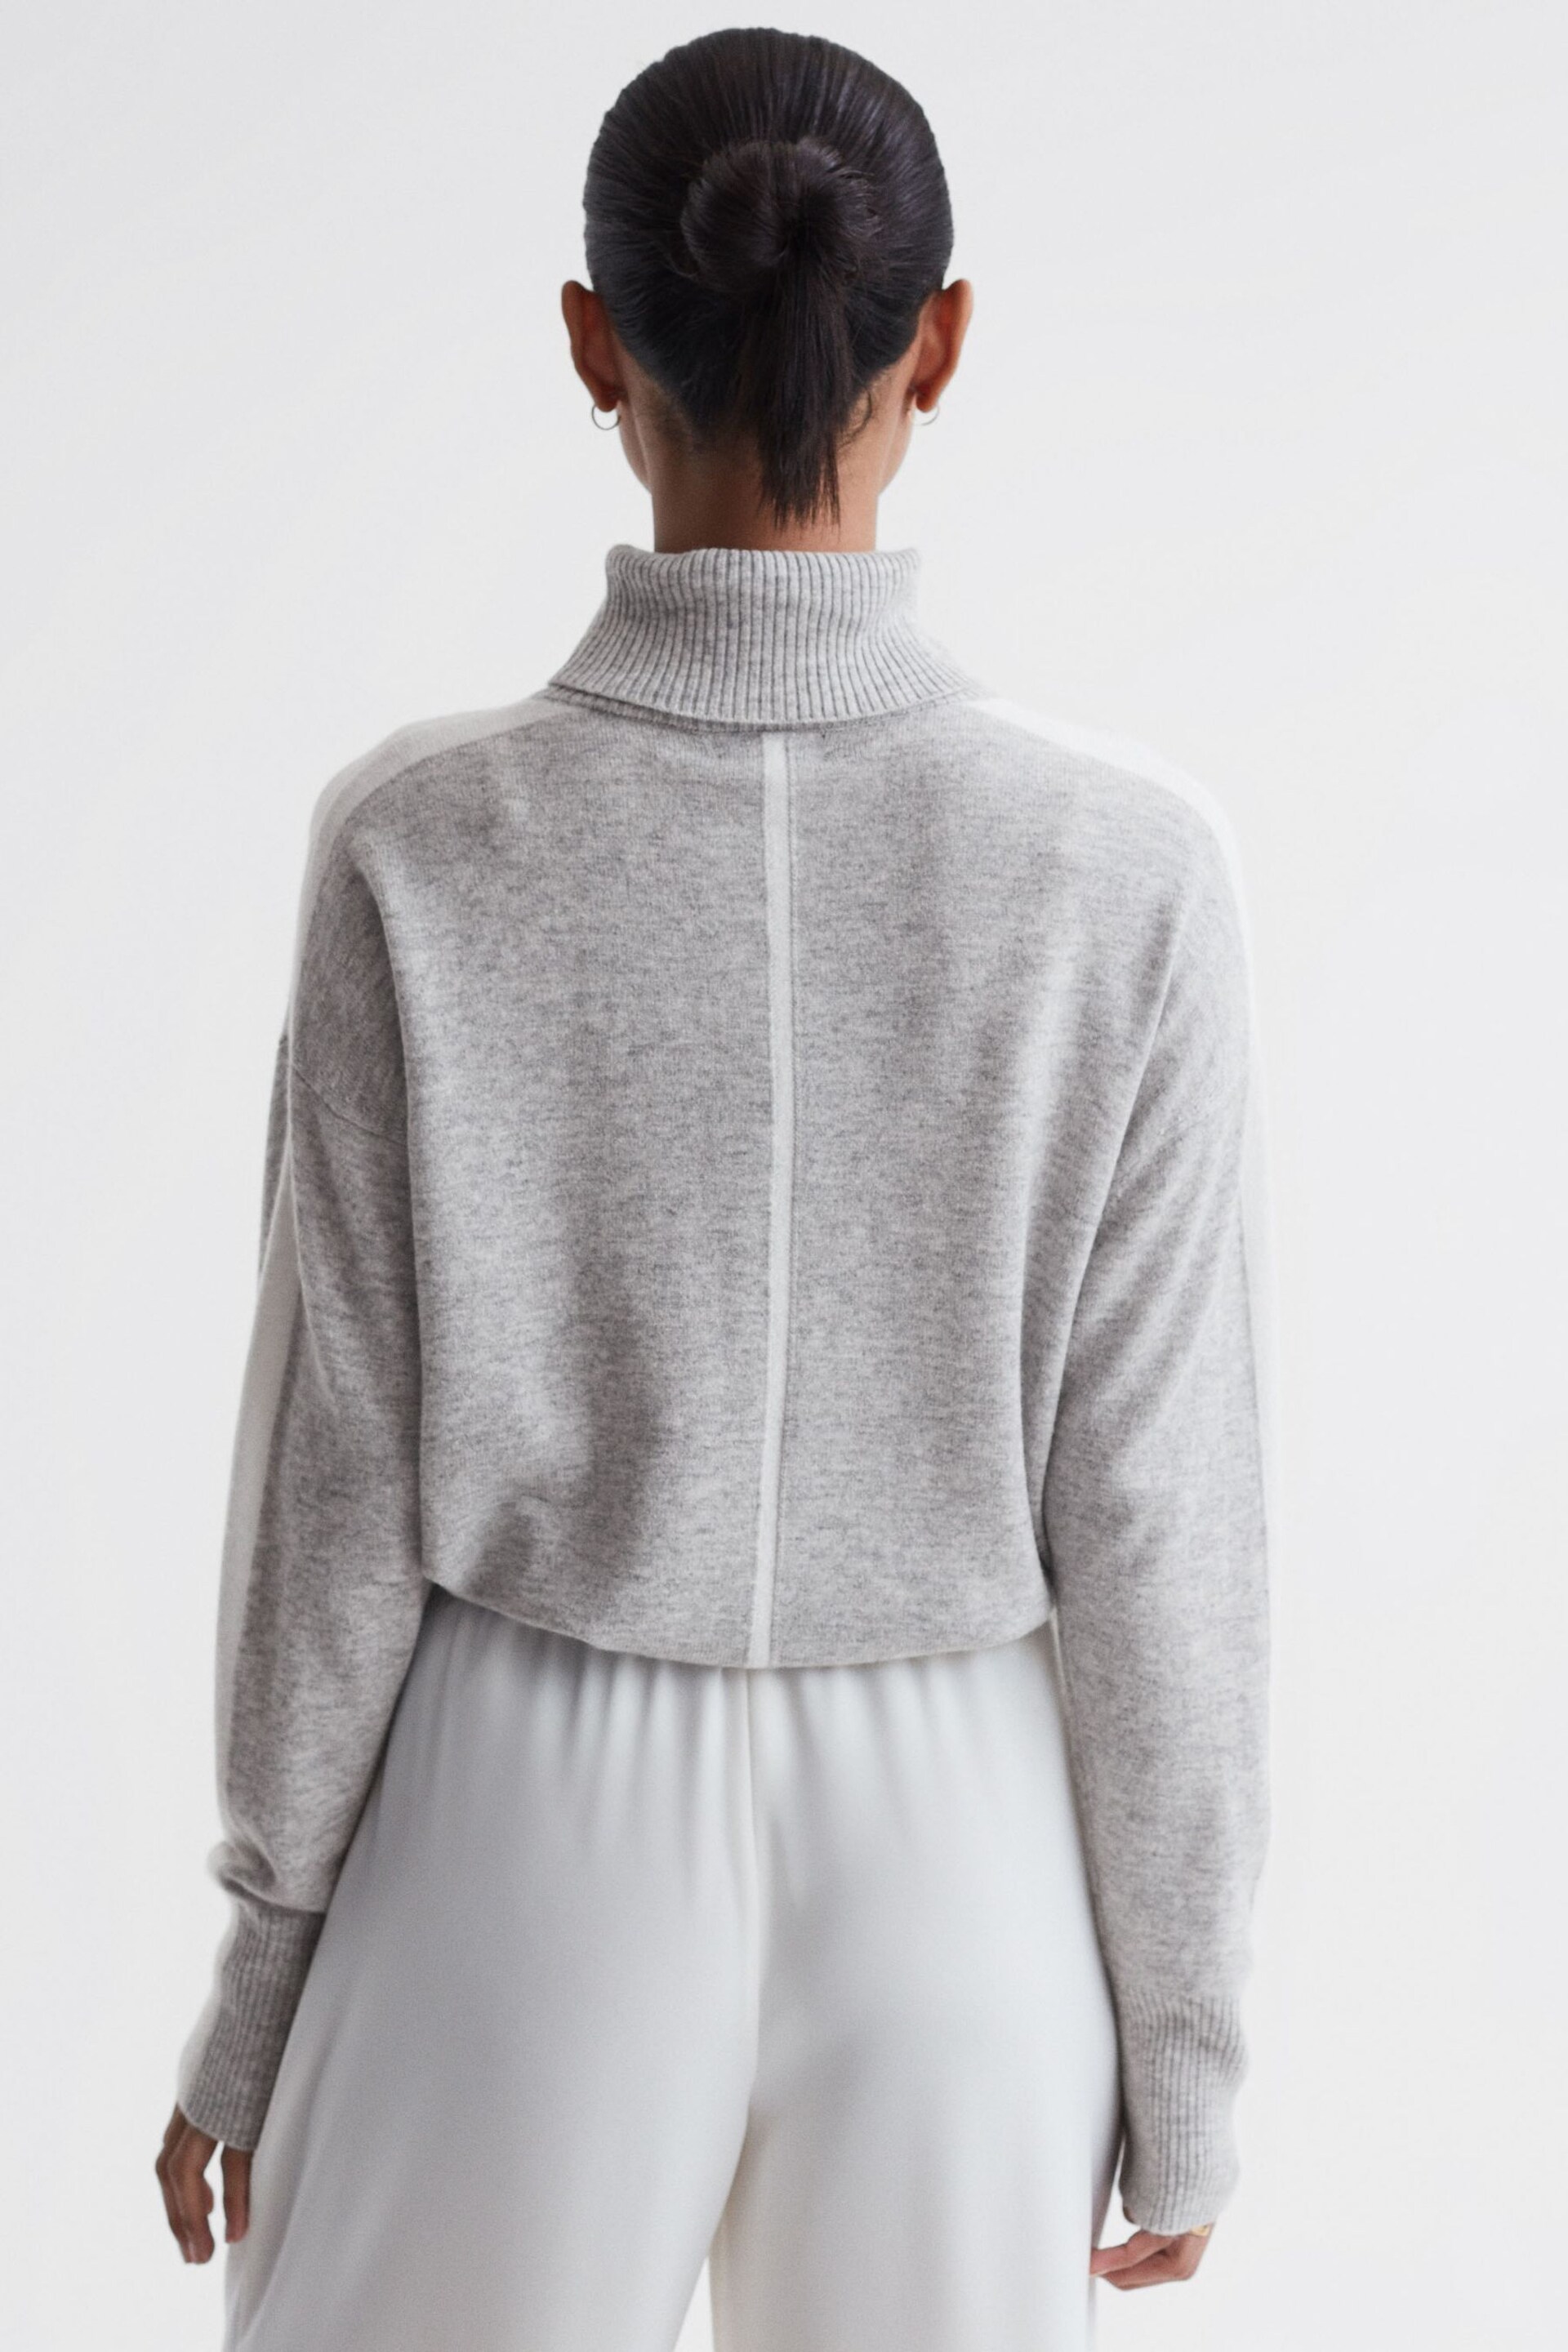 Reiss Grey/White Alexis Wool Blend Roll Neck Jumper - Image 5 of 5